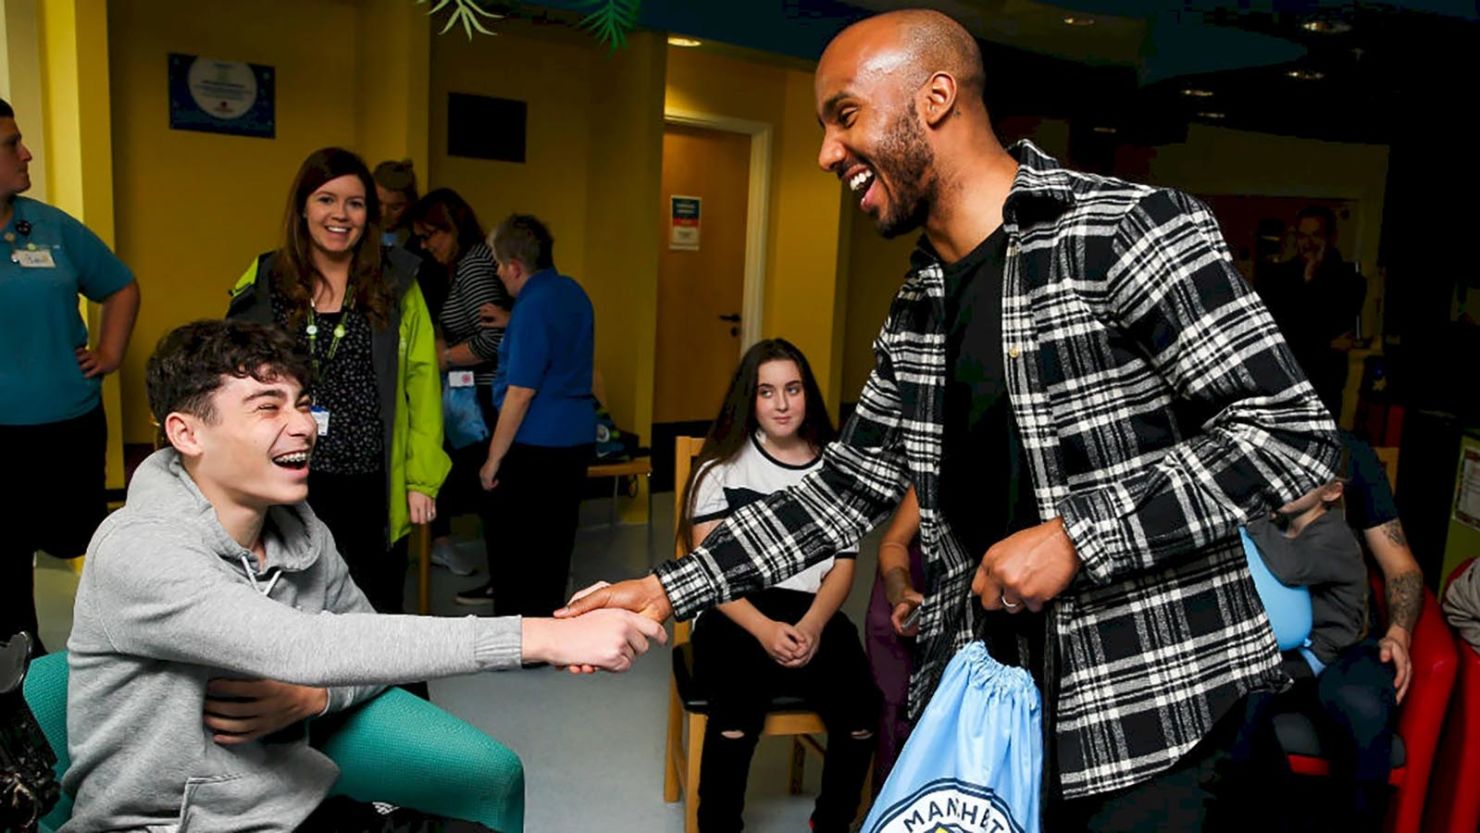 The new pain distraction unit was funded by Manchester City players including Fabian Delph (right).